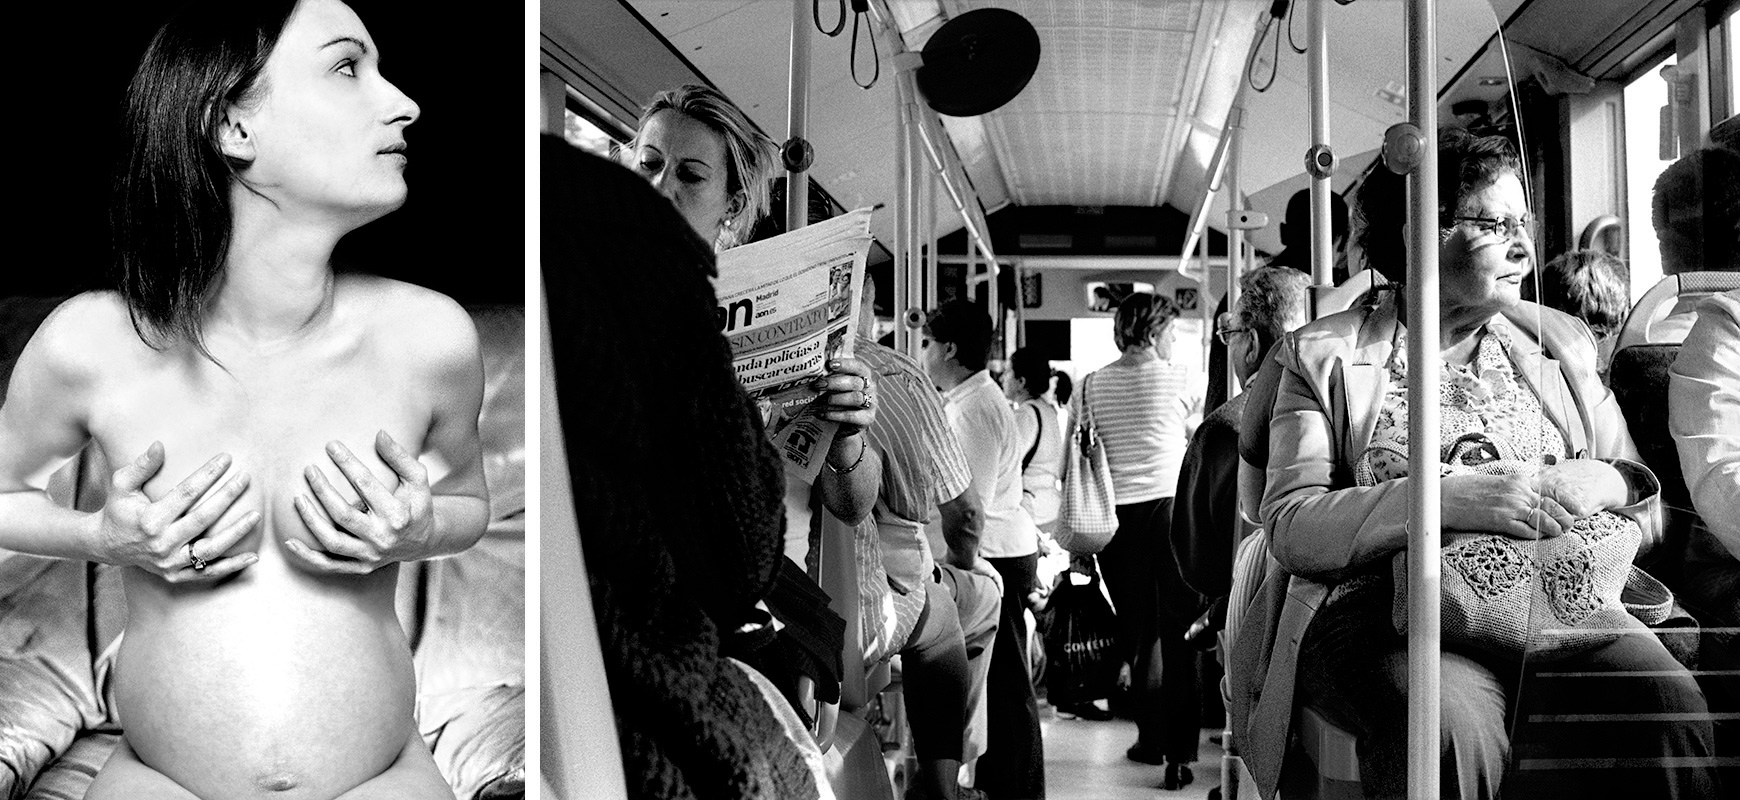 Woman covering her brest vs people reading newspaper in the bus